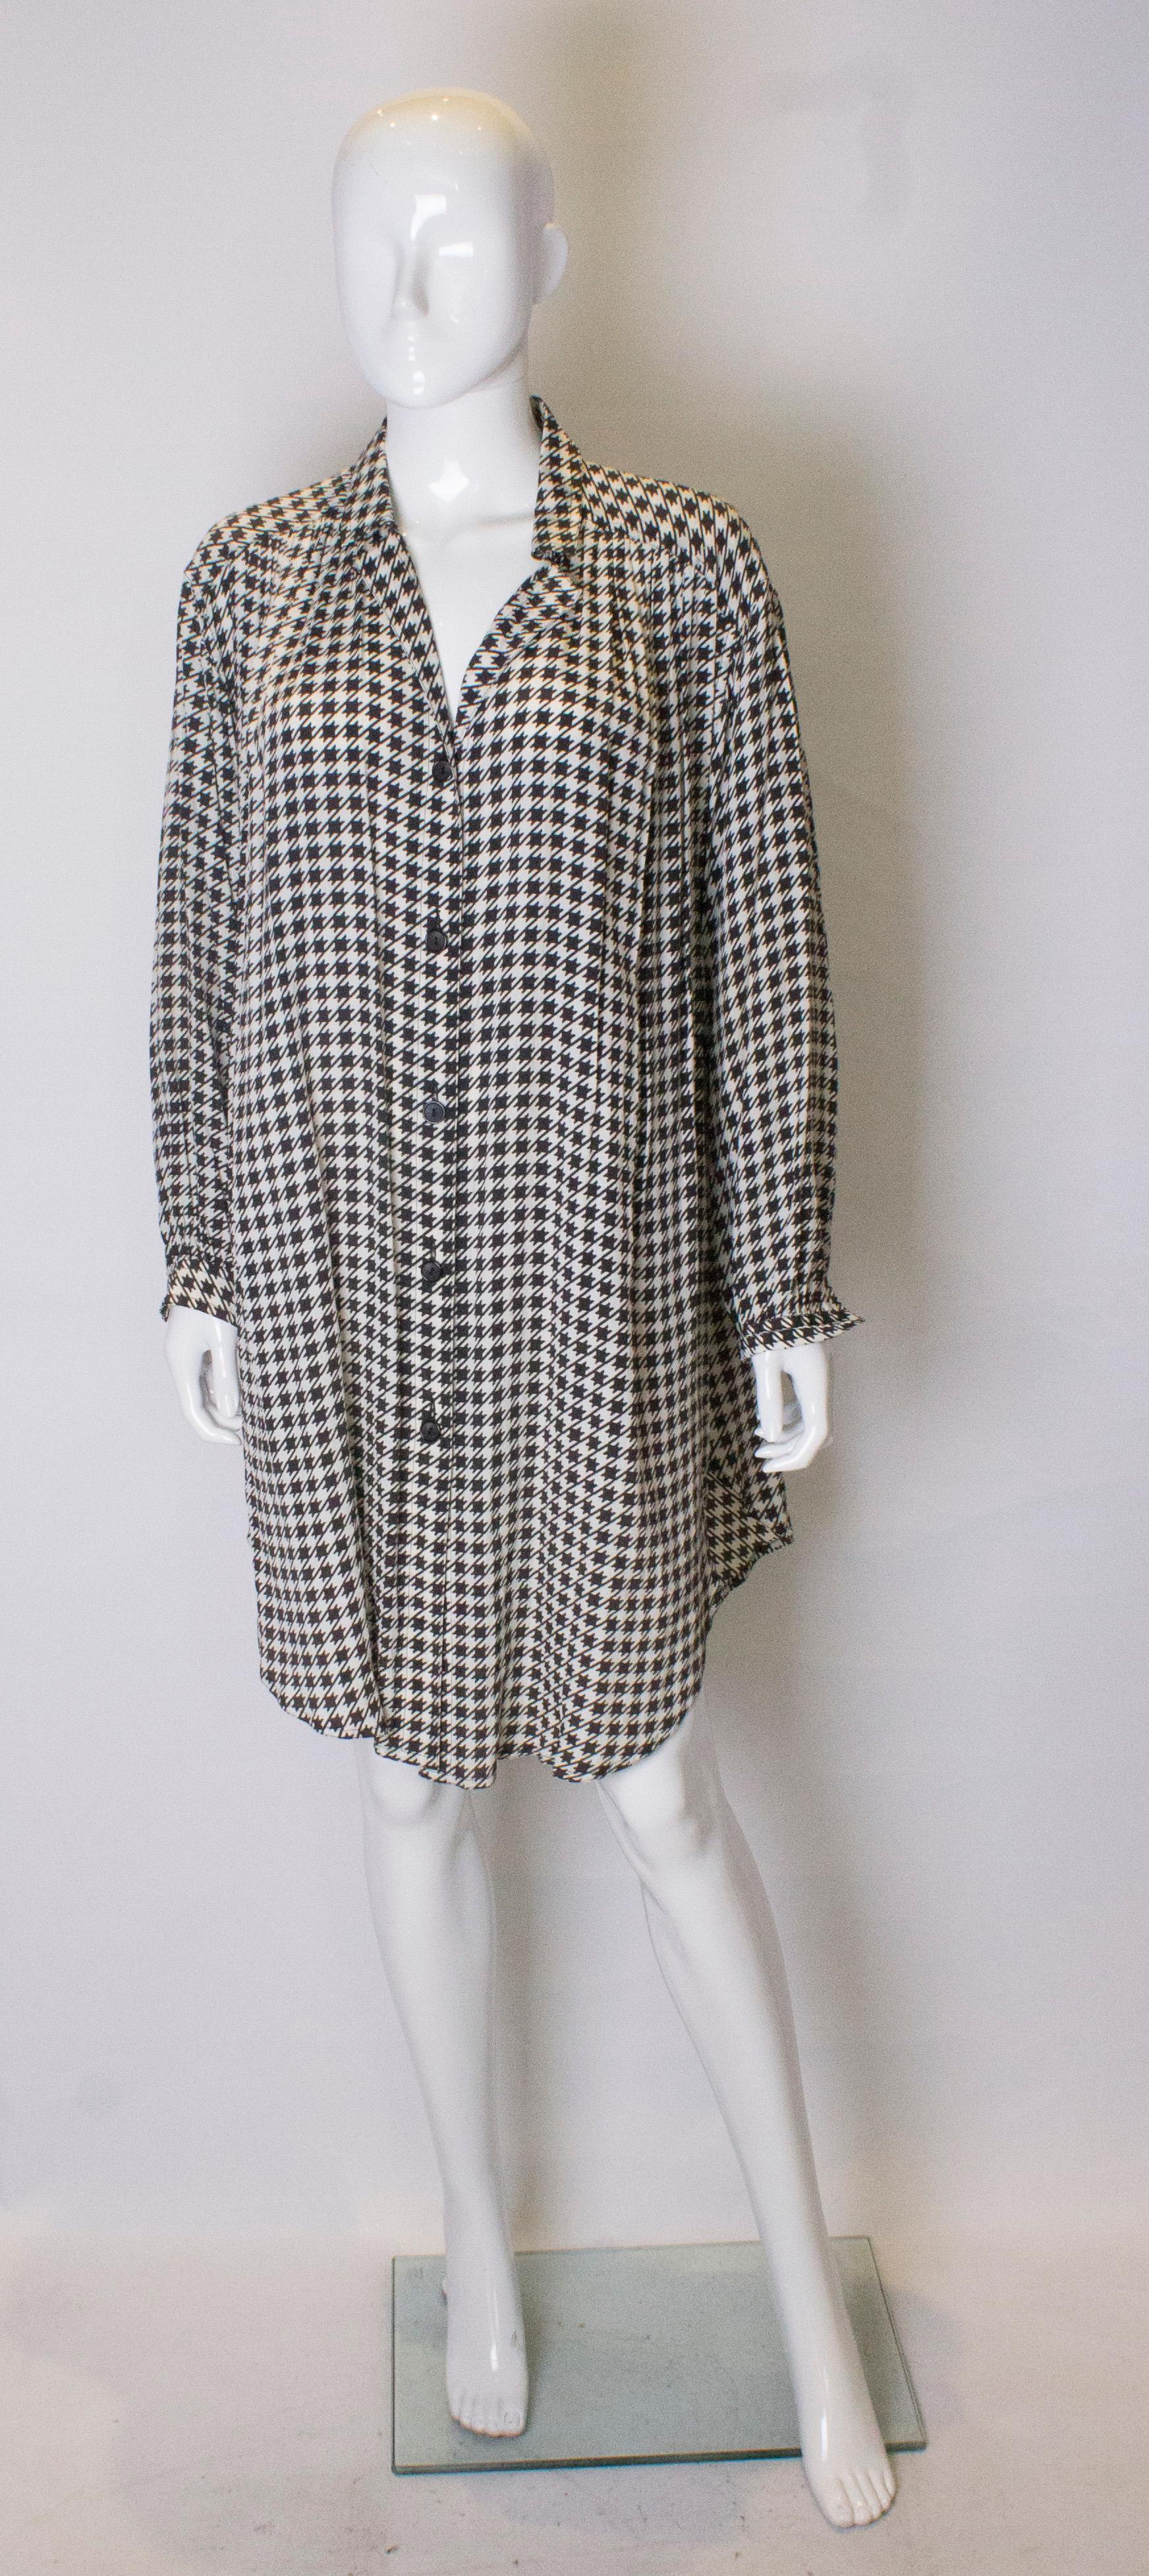 A great black and white silk overshirt by Roland Klein.
The shirt has gathering at the yoke, front and back and a 9'' slit on either side. It is loose fitting , and will fit a bust up to 48''.